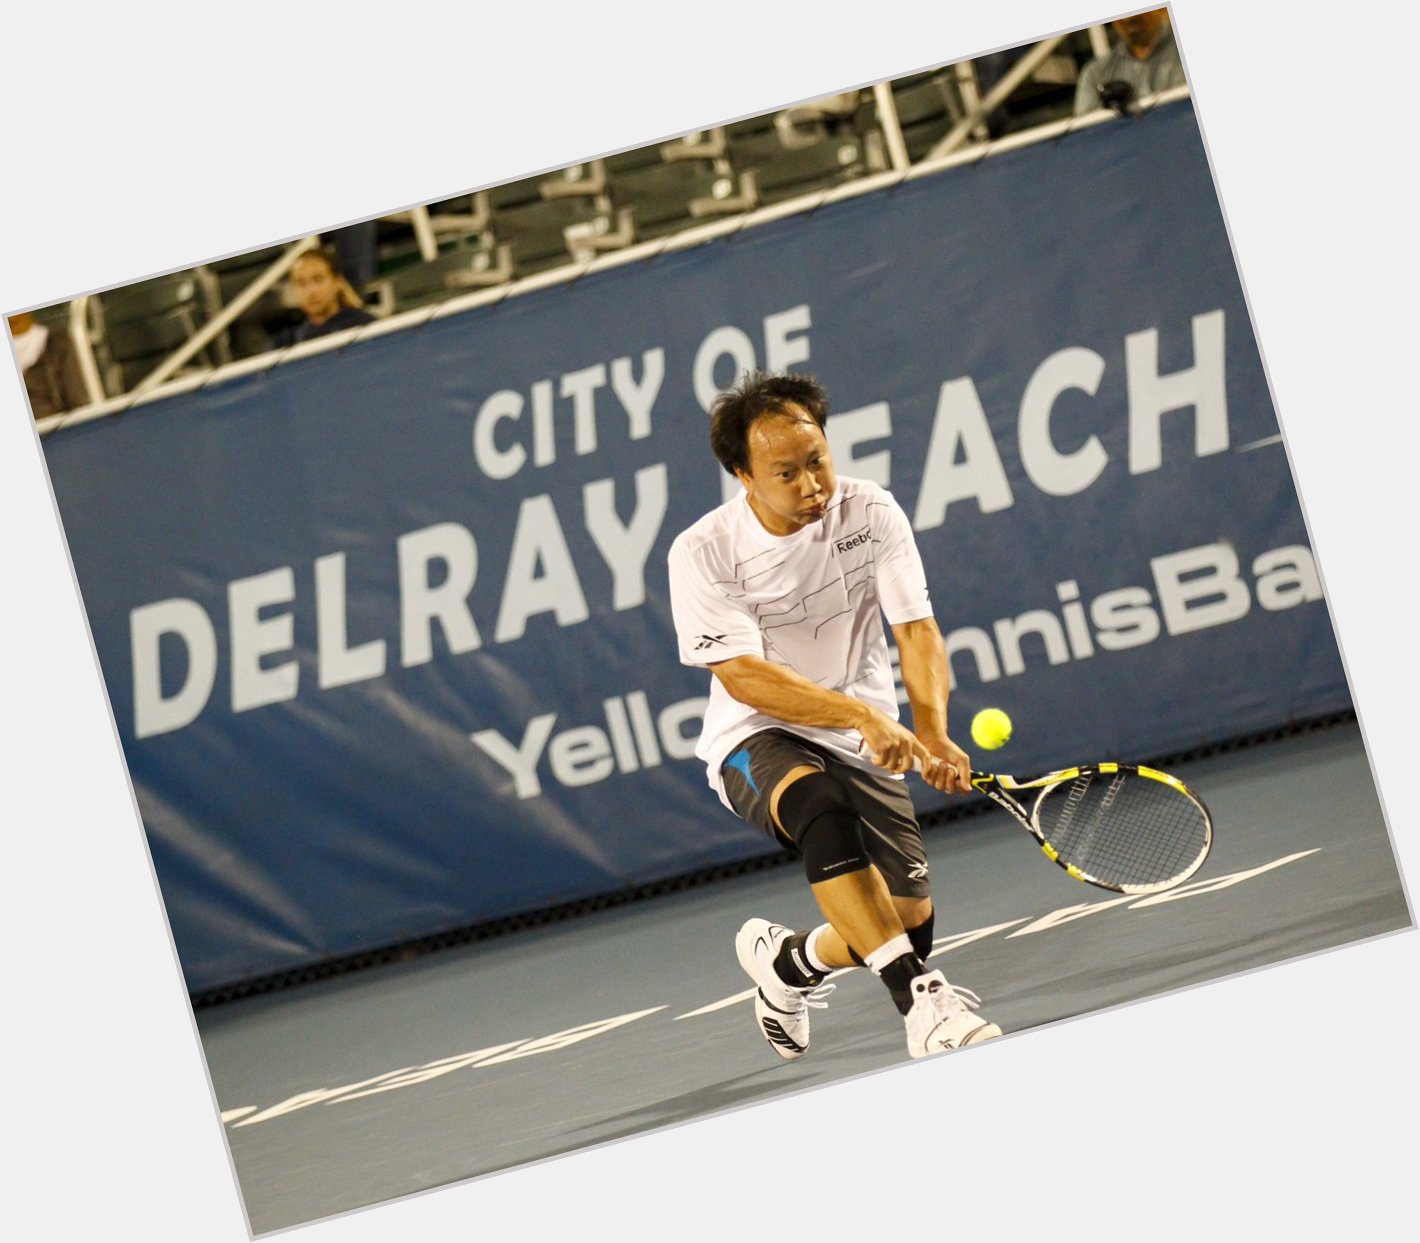 Happy Birthday, Michael Chang!  Your family hopes you enjoy the day! 